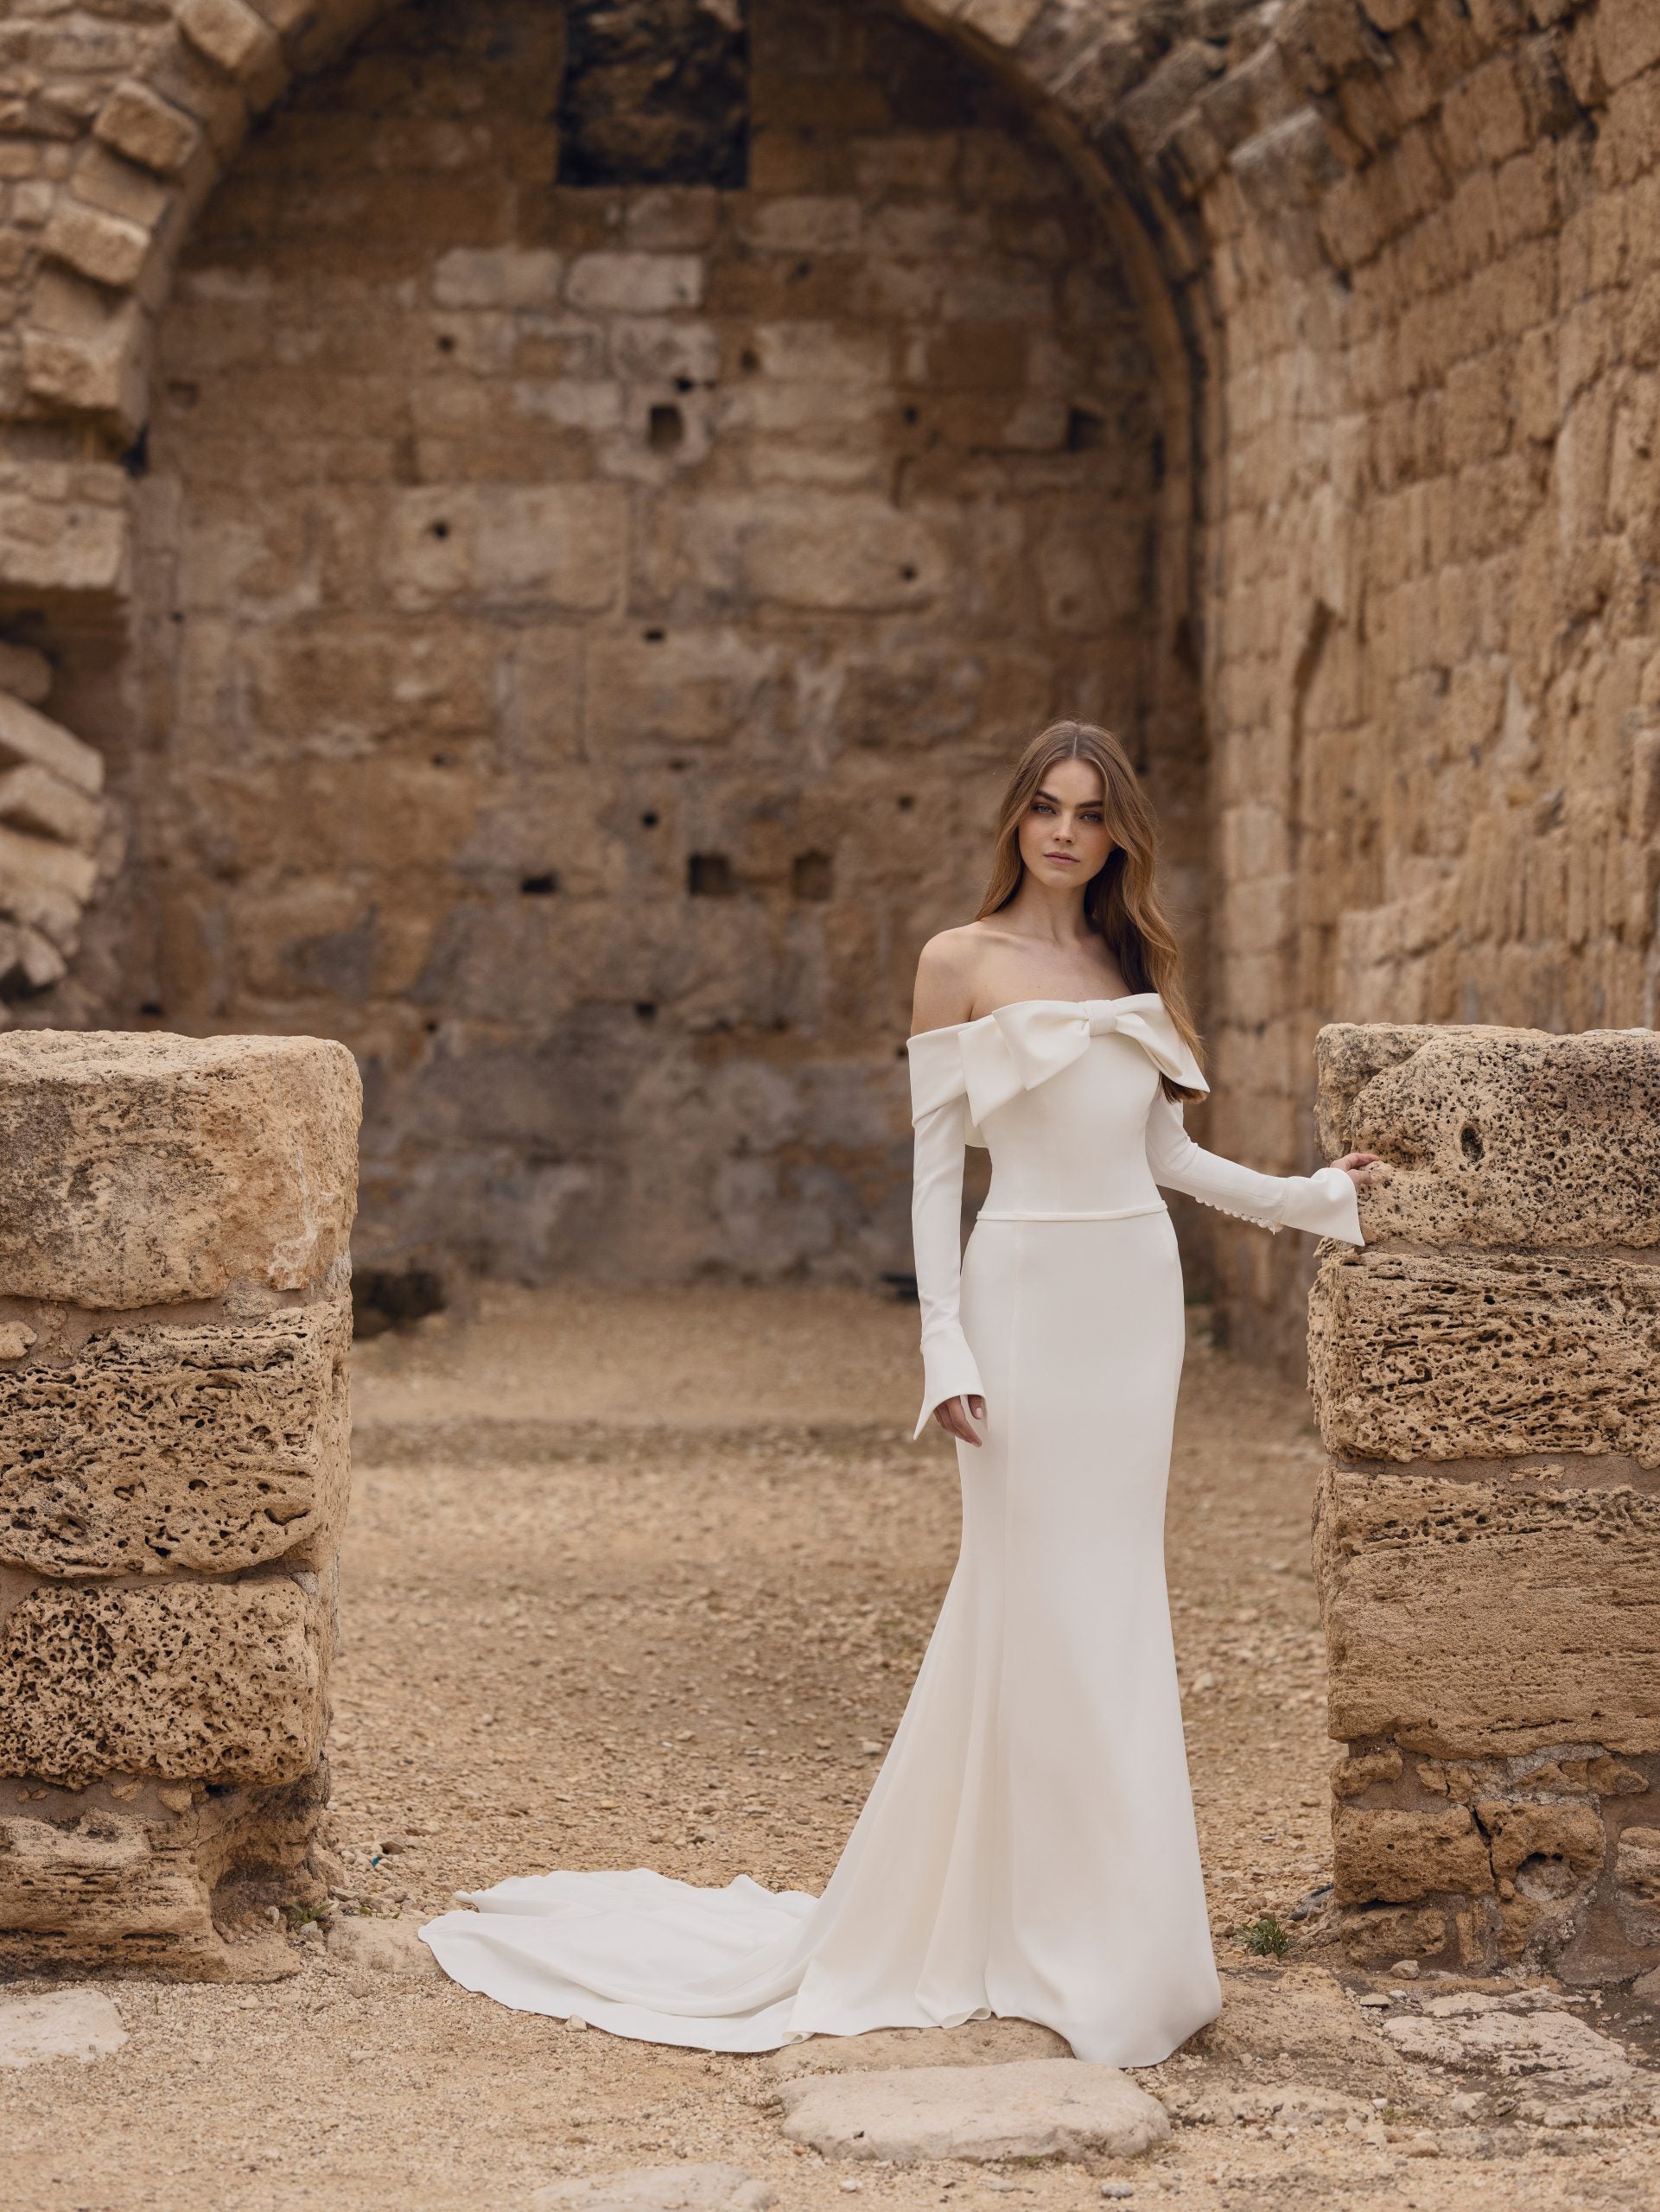 Long Sleeve Off The Shoulder Fit And Flare Wedding Dress by Love by Pnina Tornai - Image 1